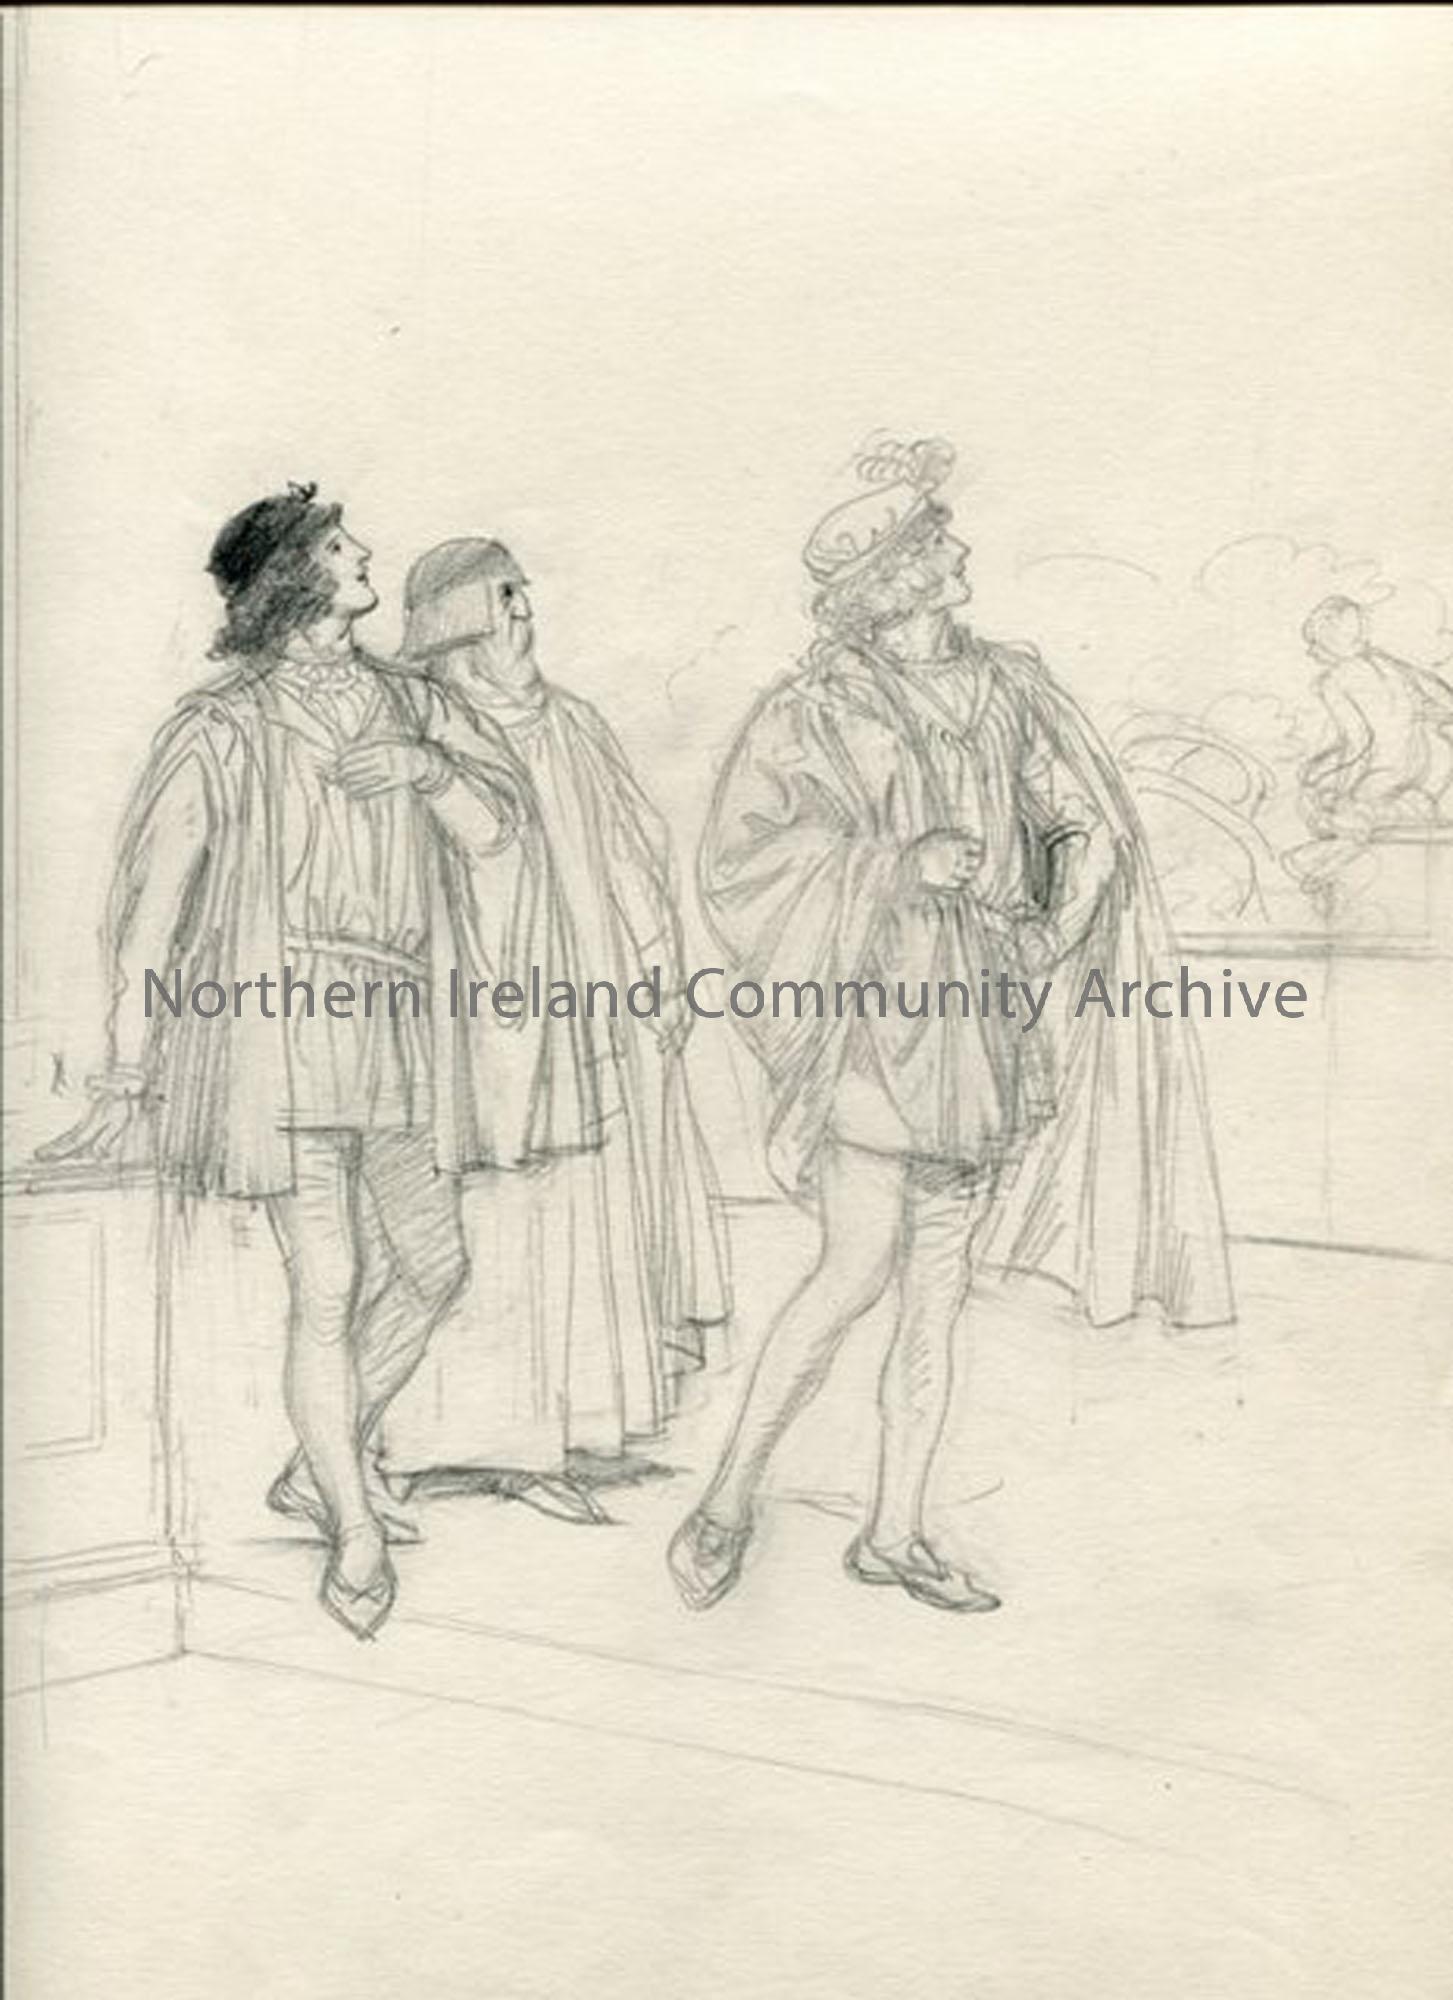 Hugh Thomson artwork titled, Pencil sketch for As You Like It